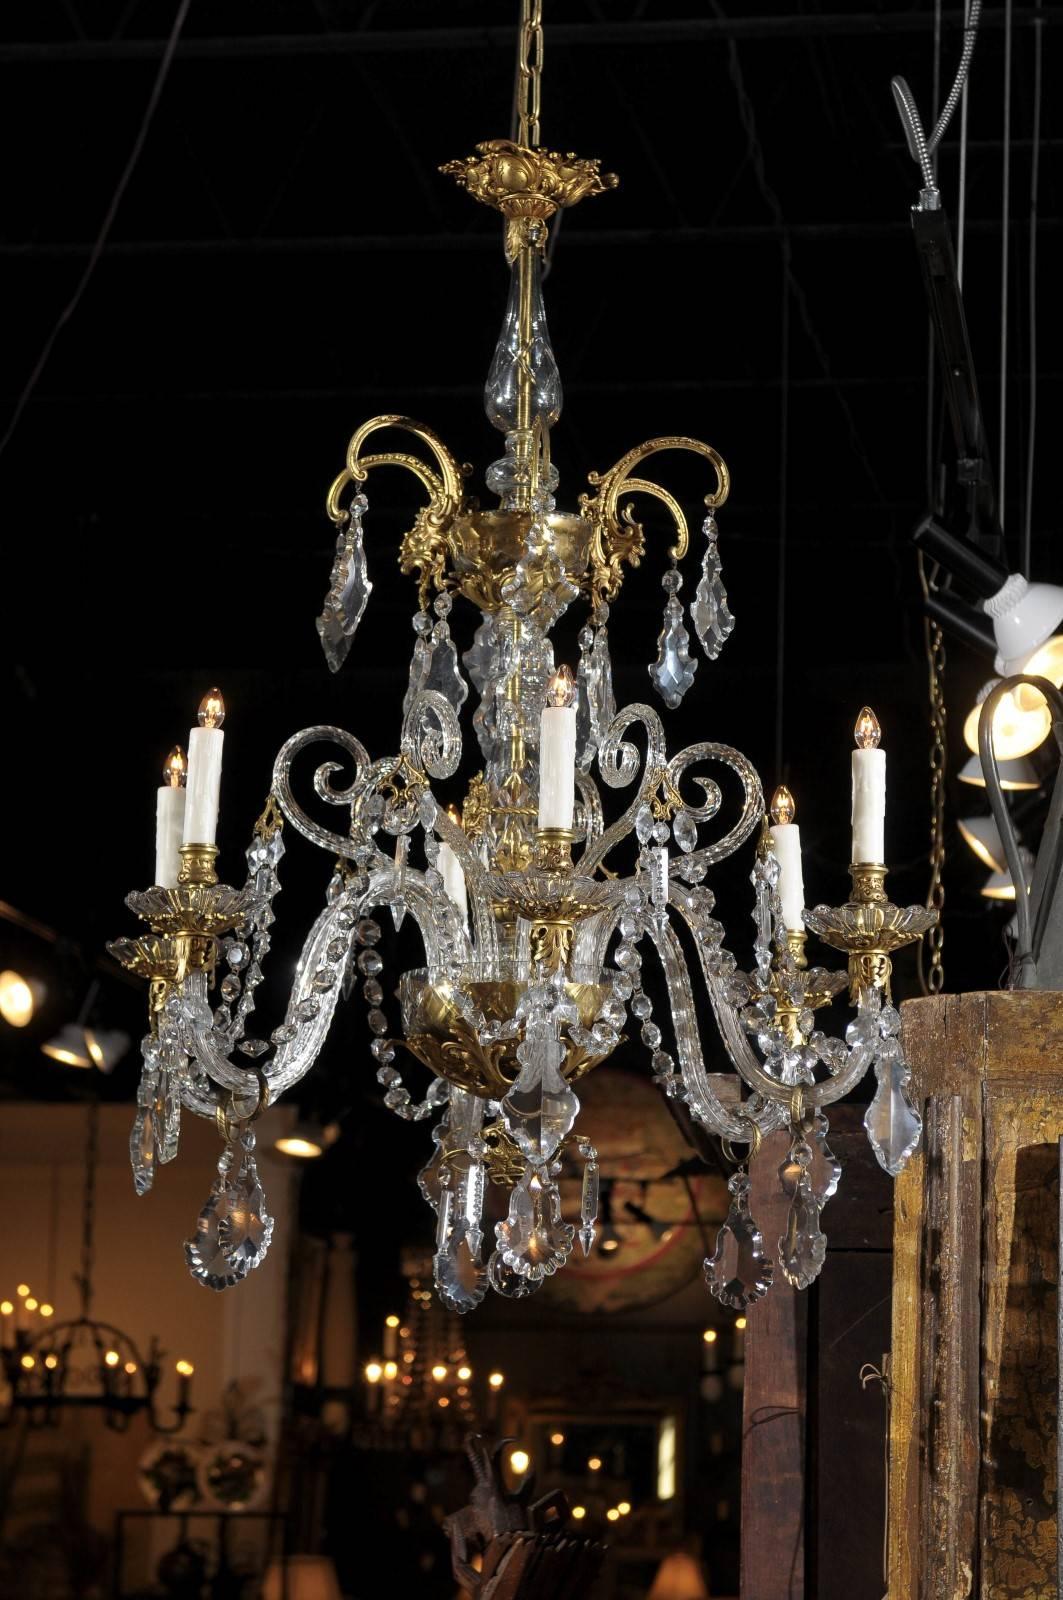 A French rococo style gilt bronze and crystal six-light chandelier from the 19th century. This French six-light crystal chandelier features a central etched glass column with gold mercury glass accents supporting six twisted glass scrolled arms with